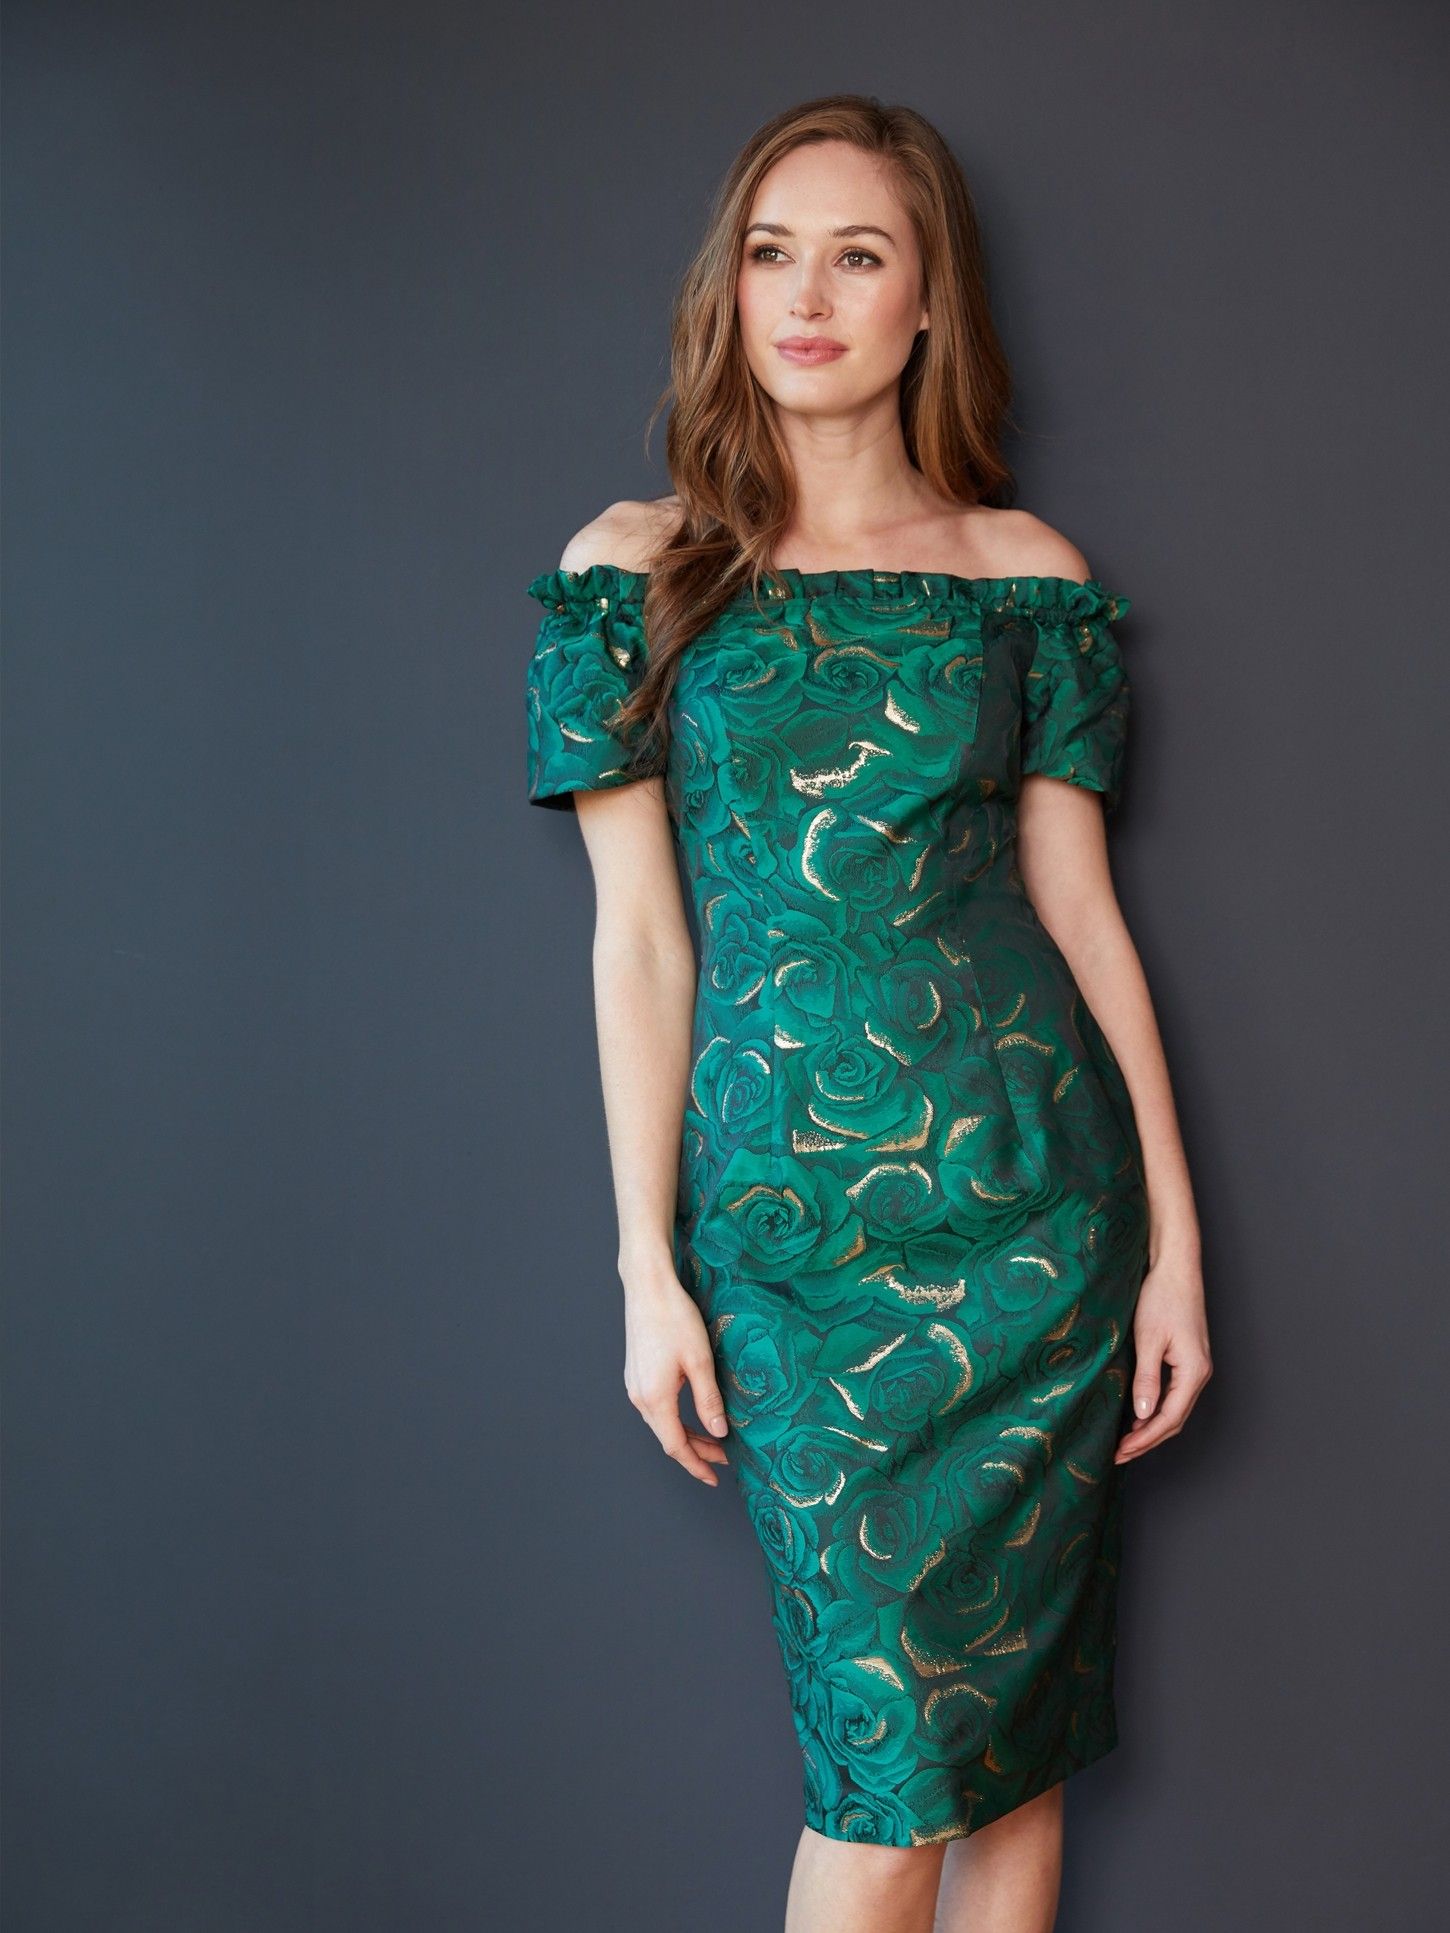 This glamorous stretch floral jacquard dress by Gina Bacconi will make you feel stunning. The off the shoulder neckline with ruffle detailing adds an elegant finish. It is fully lined and is fastened with a contrast zip at the back of the dress. Perfect for a party or a special occasion.